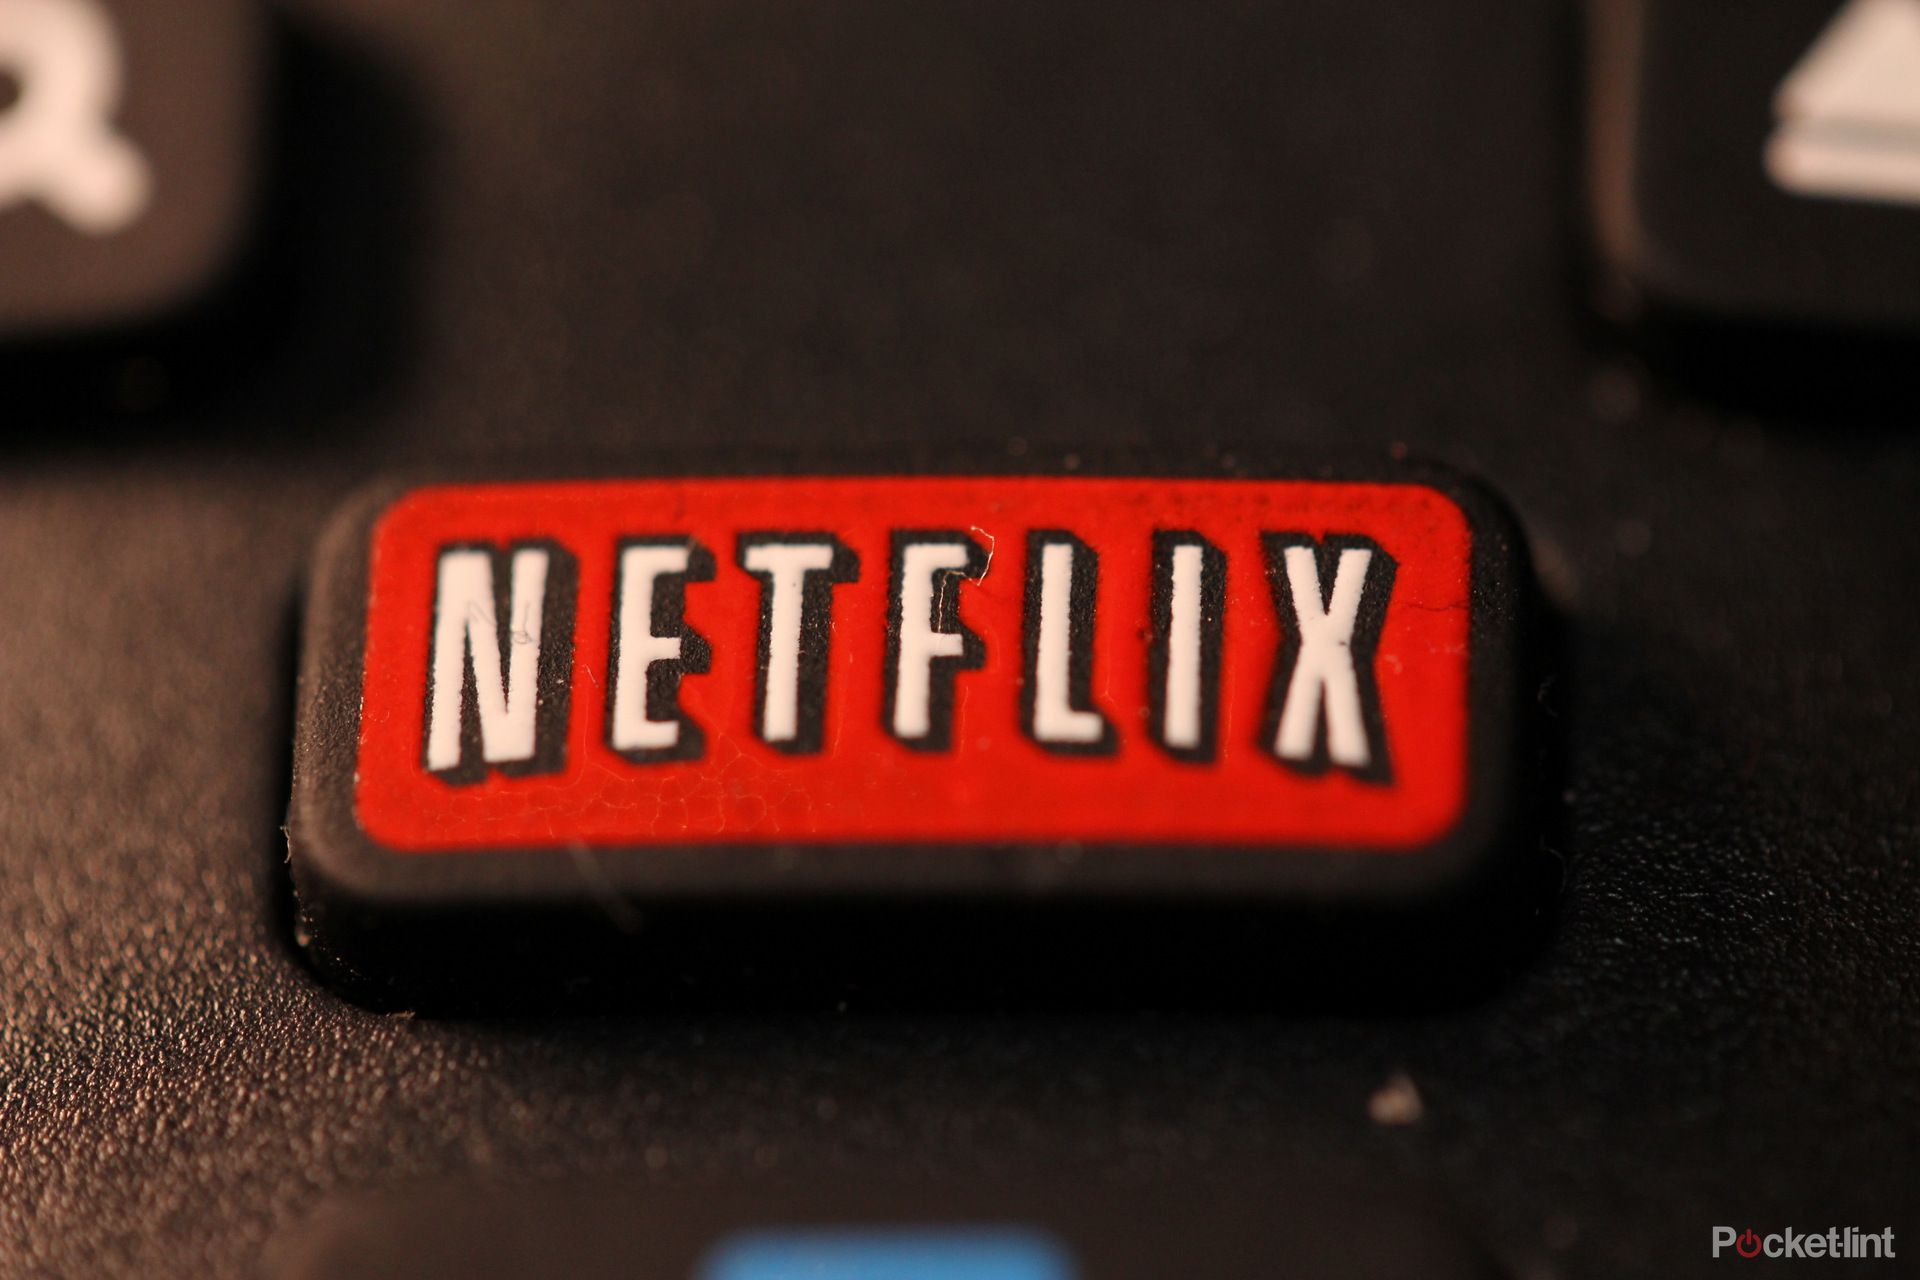 netflix button to appear on more remotes soon samsung sony lg and more onboard image 1